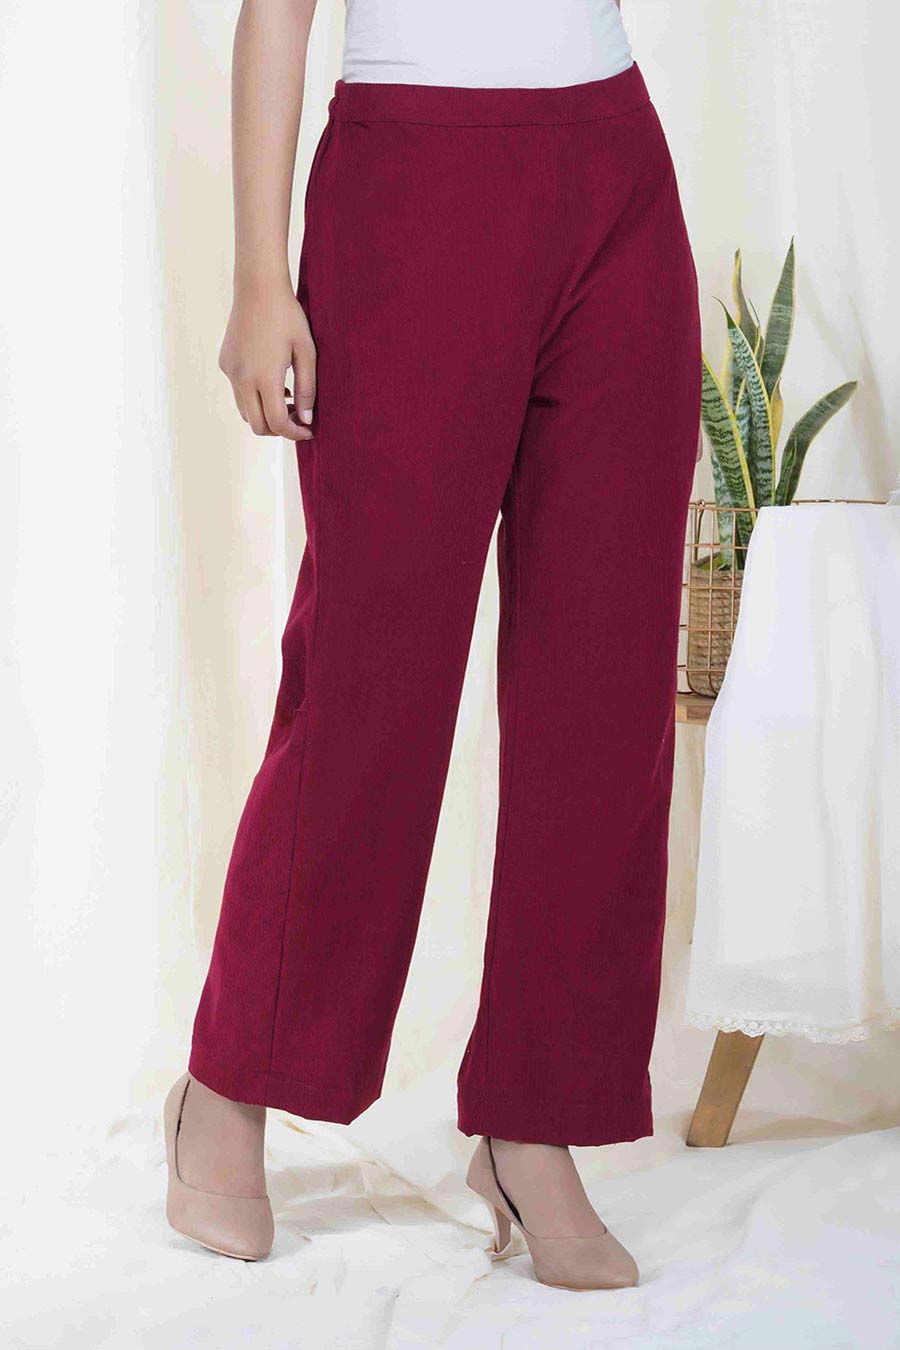 Wine Red Jacket & Pant Co-ord Set